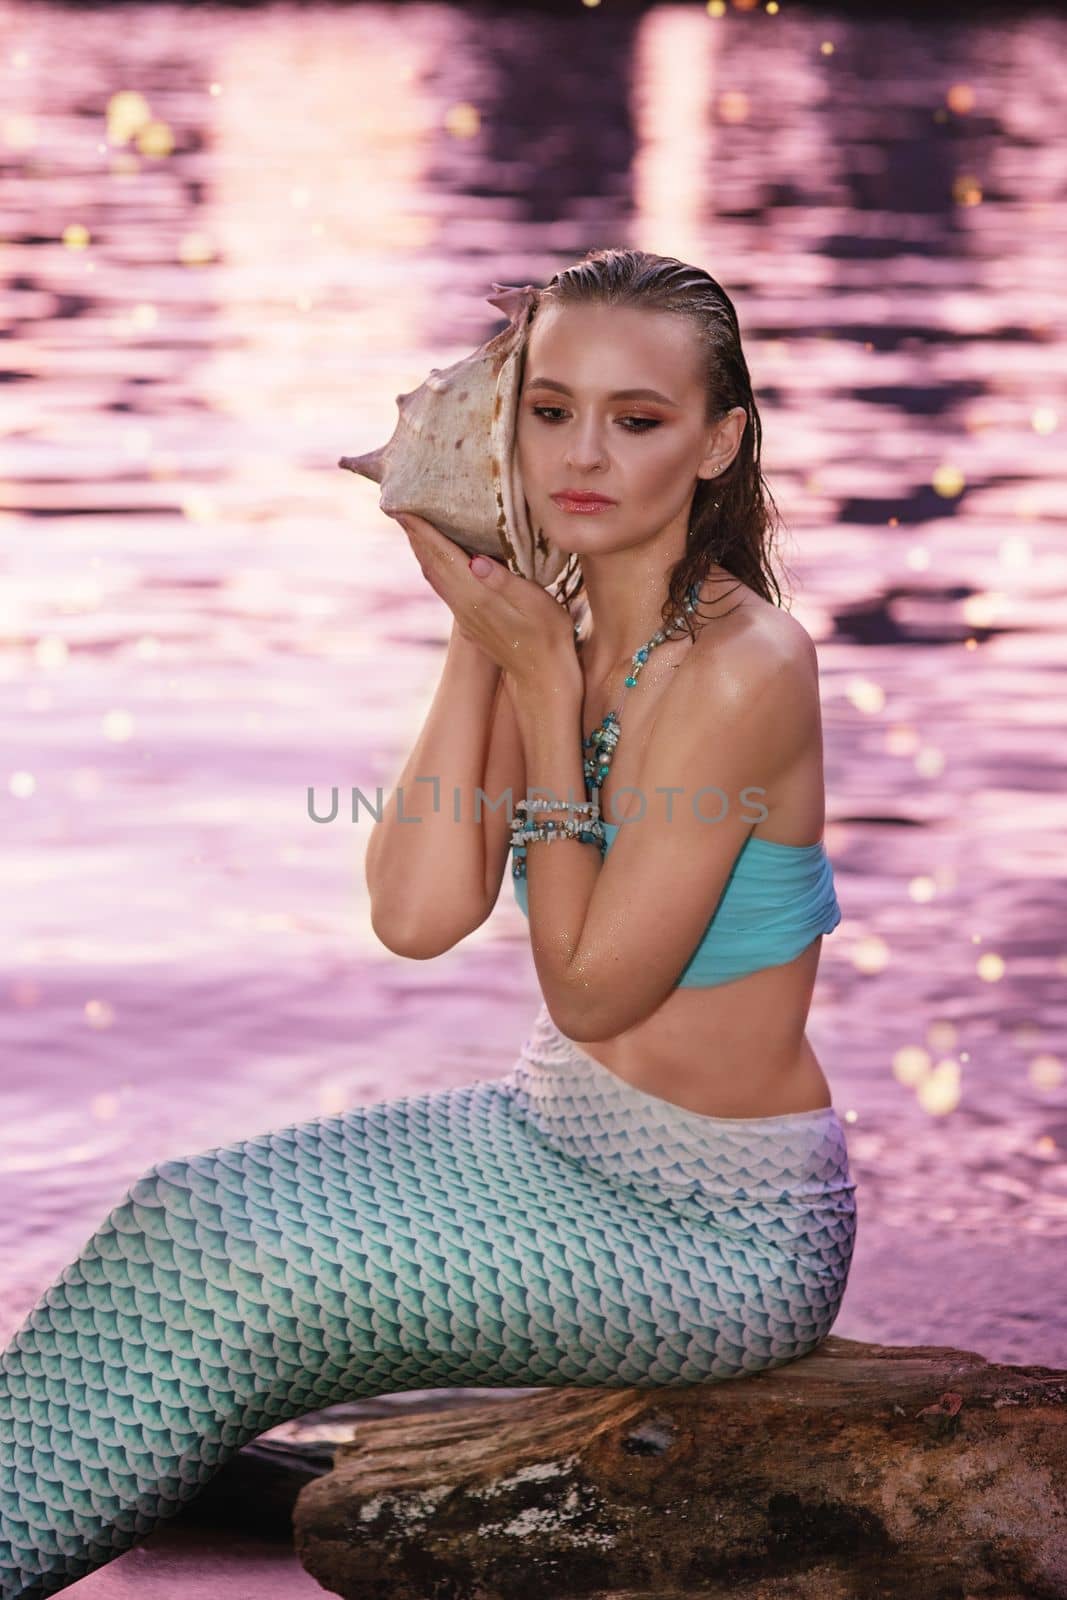 A mermaid girl sits near the water at dusk, holding a large seashell.